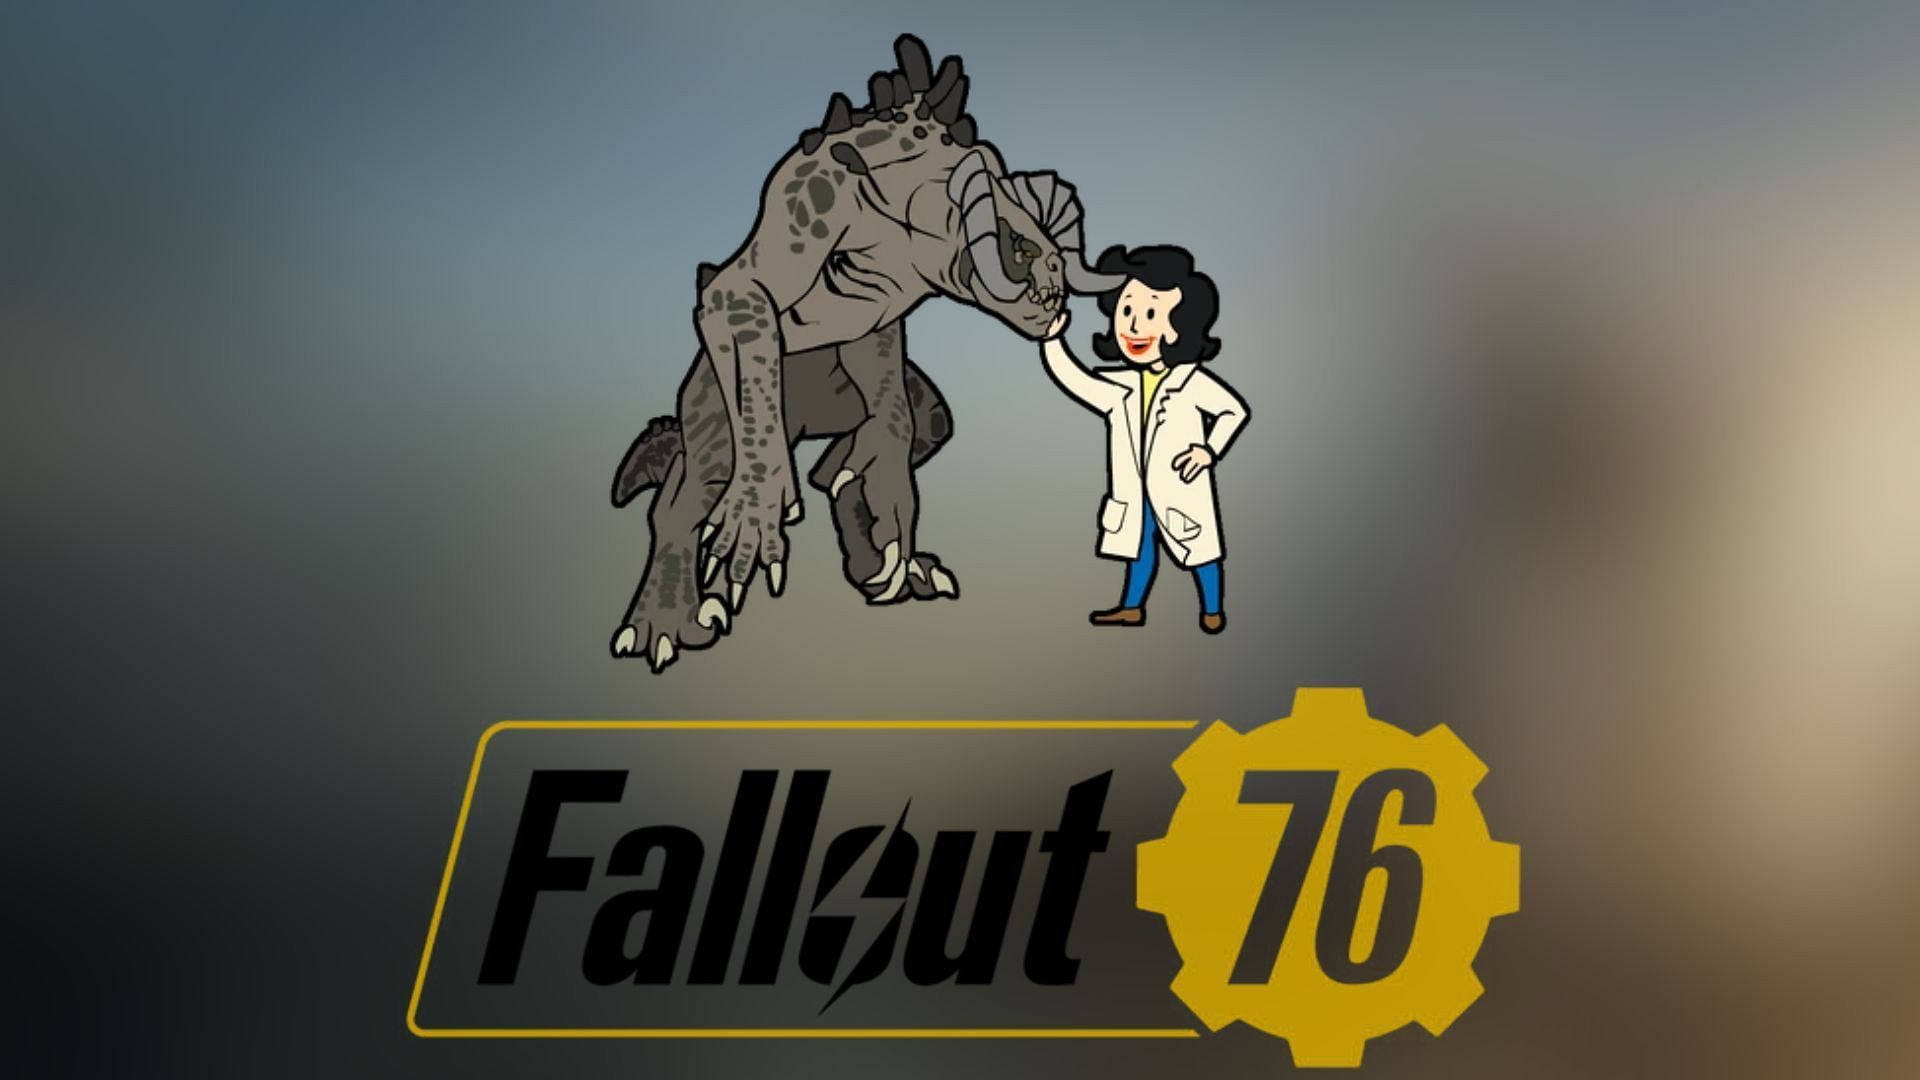 Players can get Stimpak Diffusers through the Project Paradise event in Fallout 76 (Image via Bethesda Game Studios)